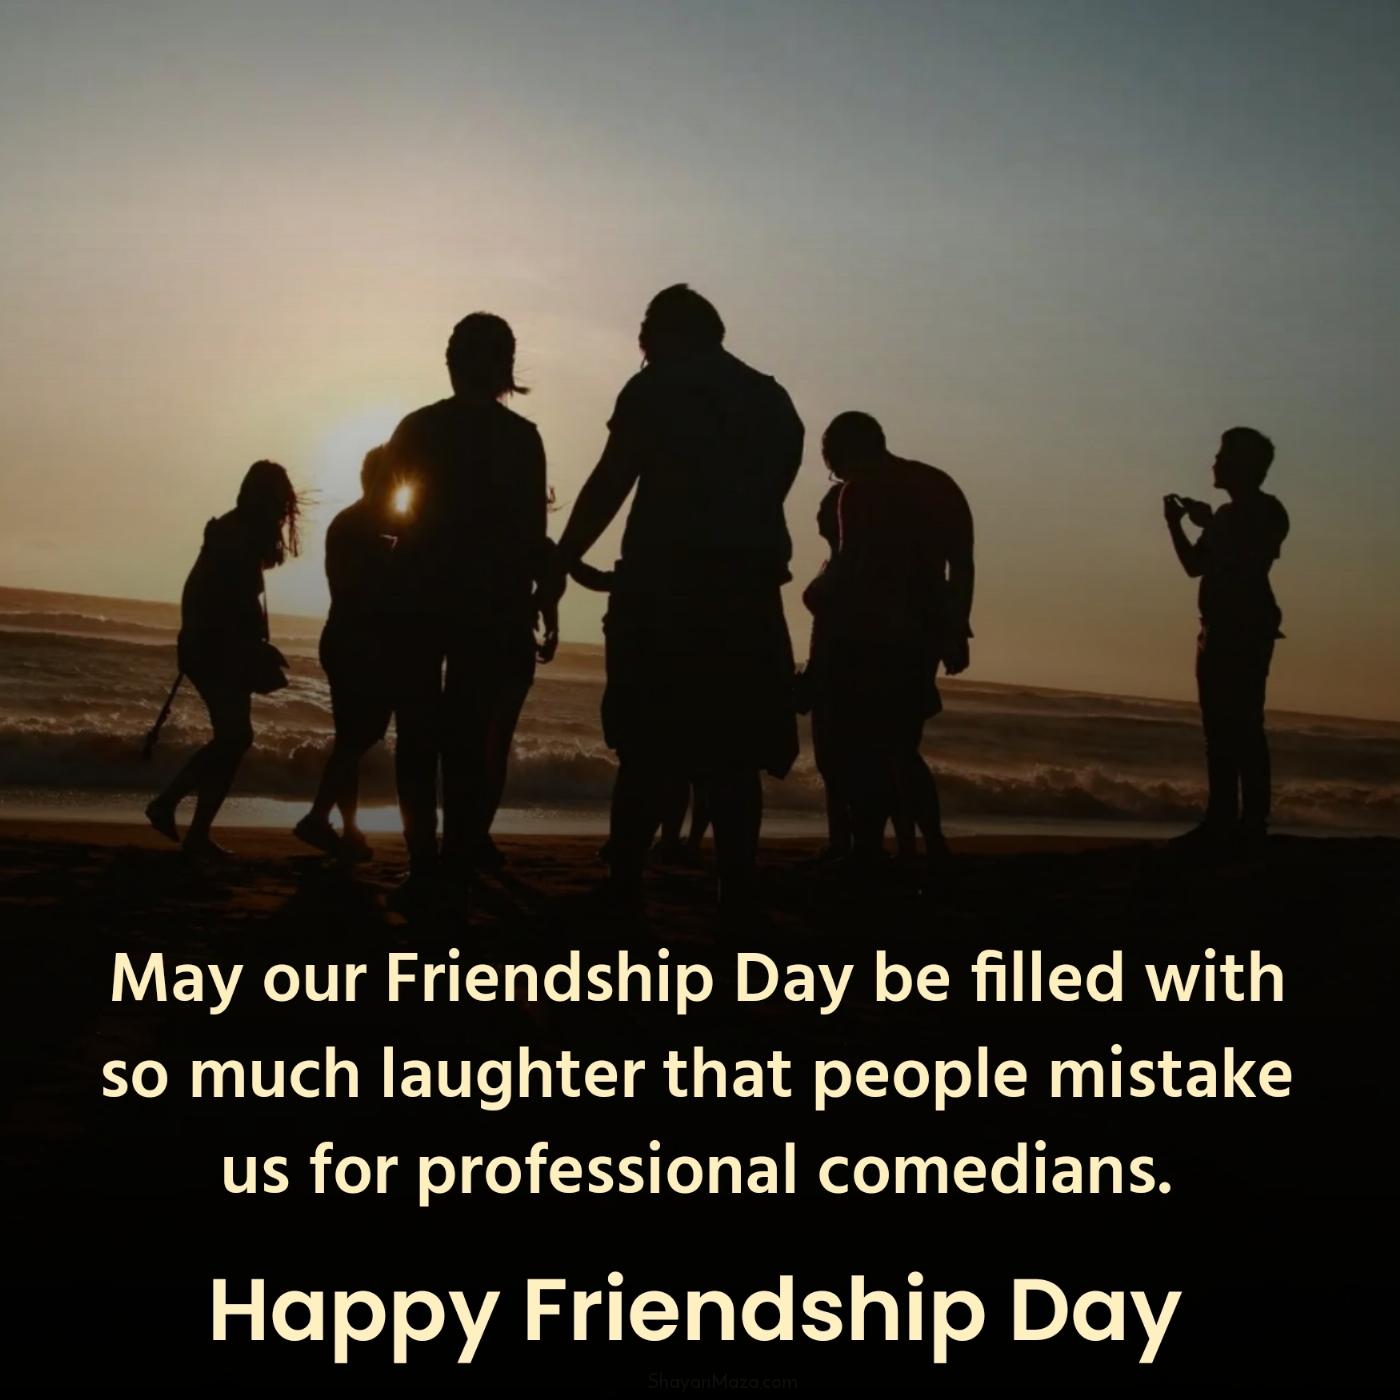 May our Friendship Day be filled with so much laughter that people mistake us